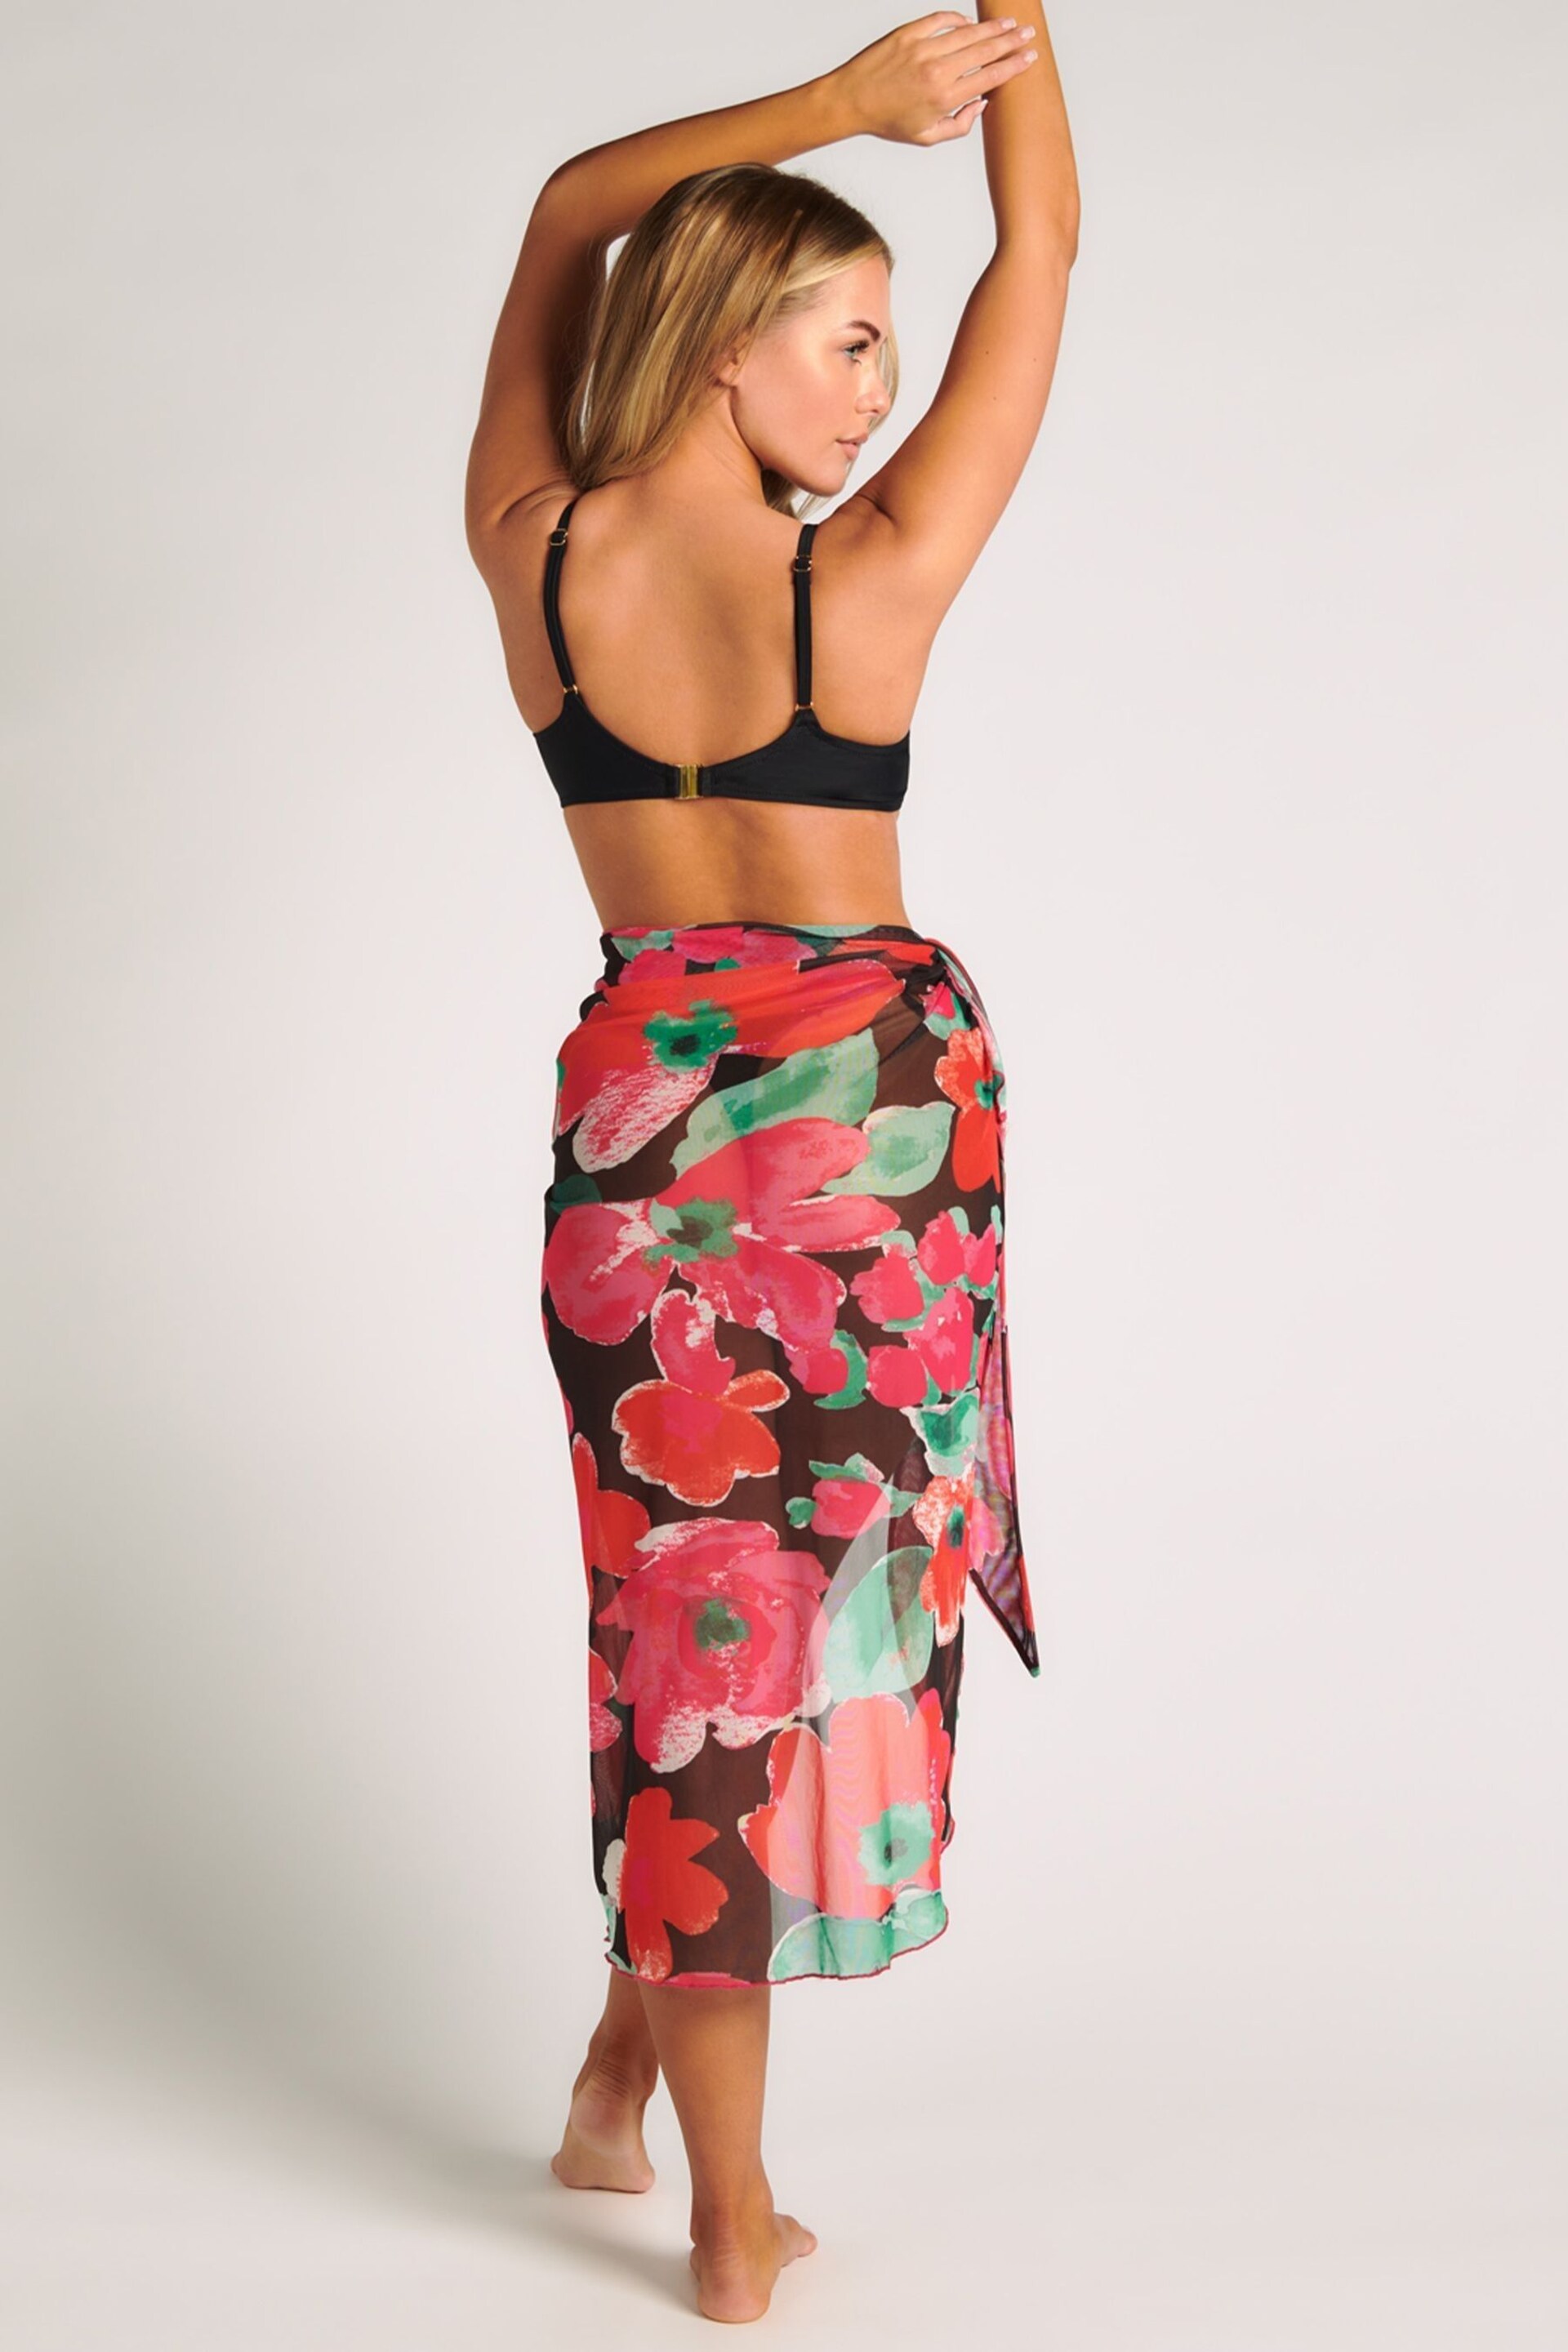 Boux Avenue Red Floral Sarong Beach Cover-Up - Image 2 of 3